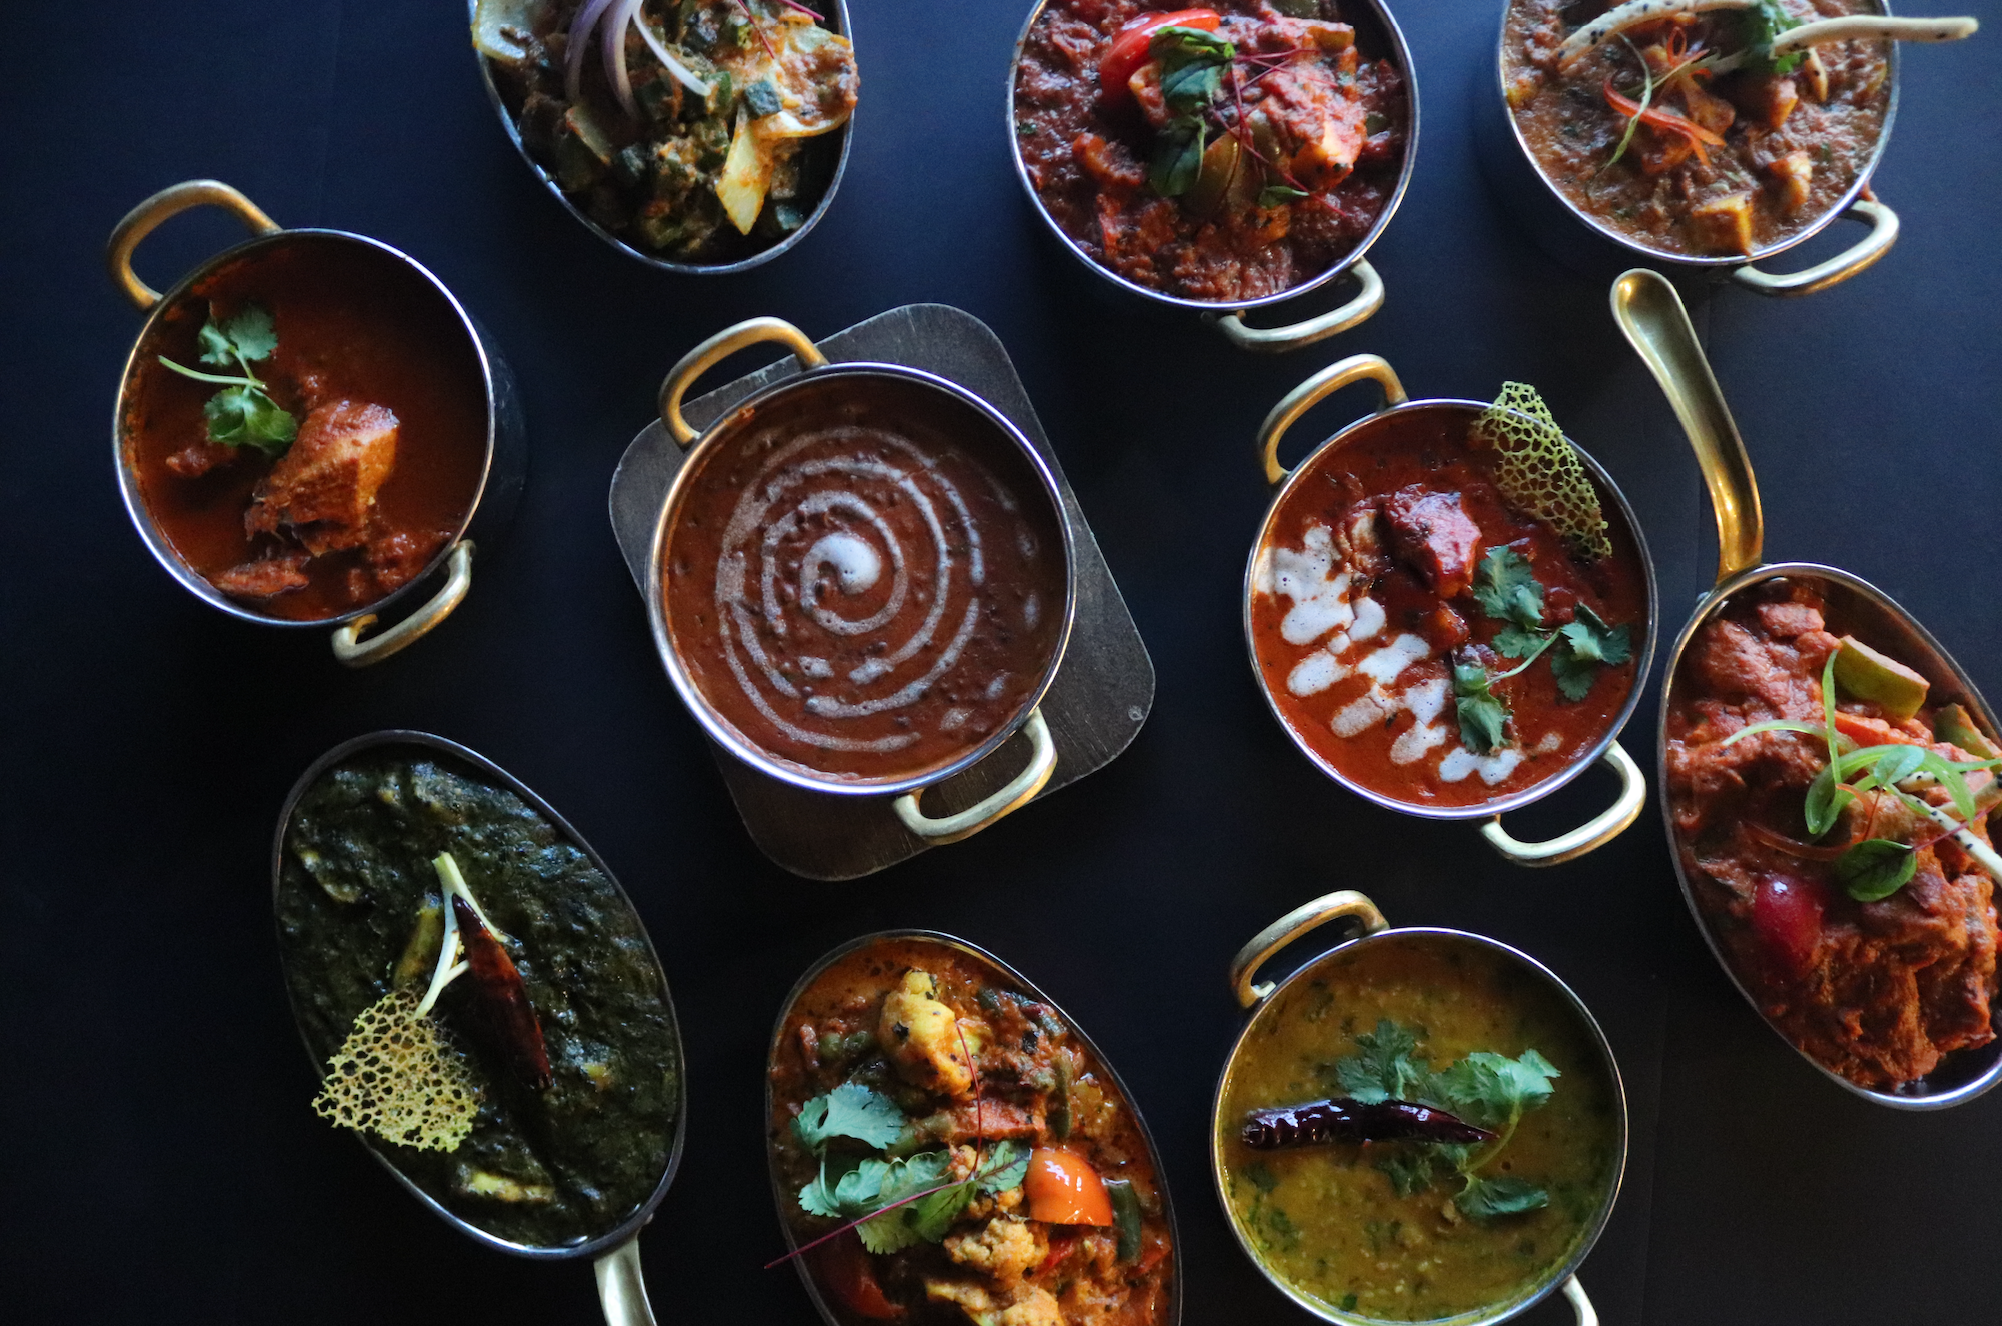 The new location, at the heart of downtown Toronto, on Young and Dundas, is expected to be a "must-visit" venue that will take food lovers on a journey into the rich history of India's cuisine.